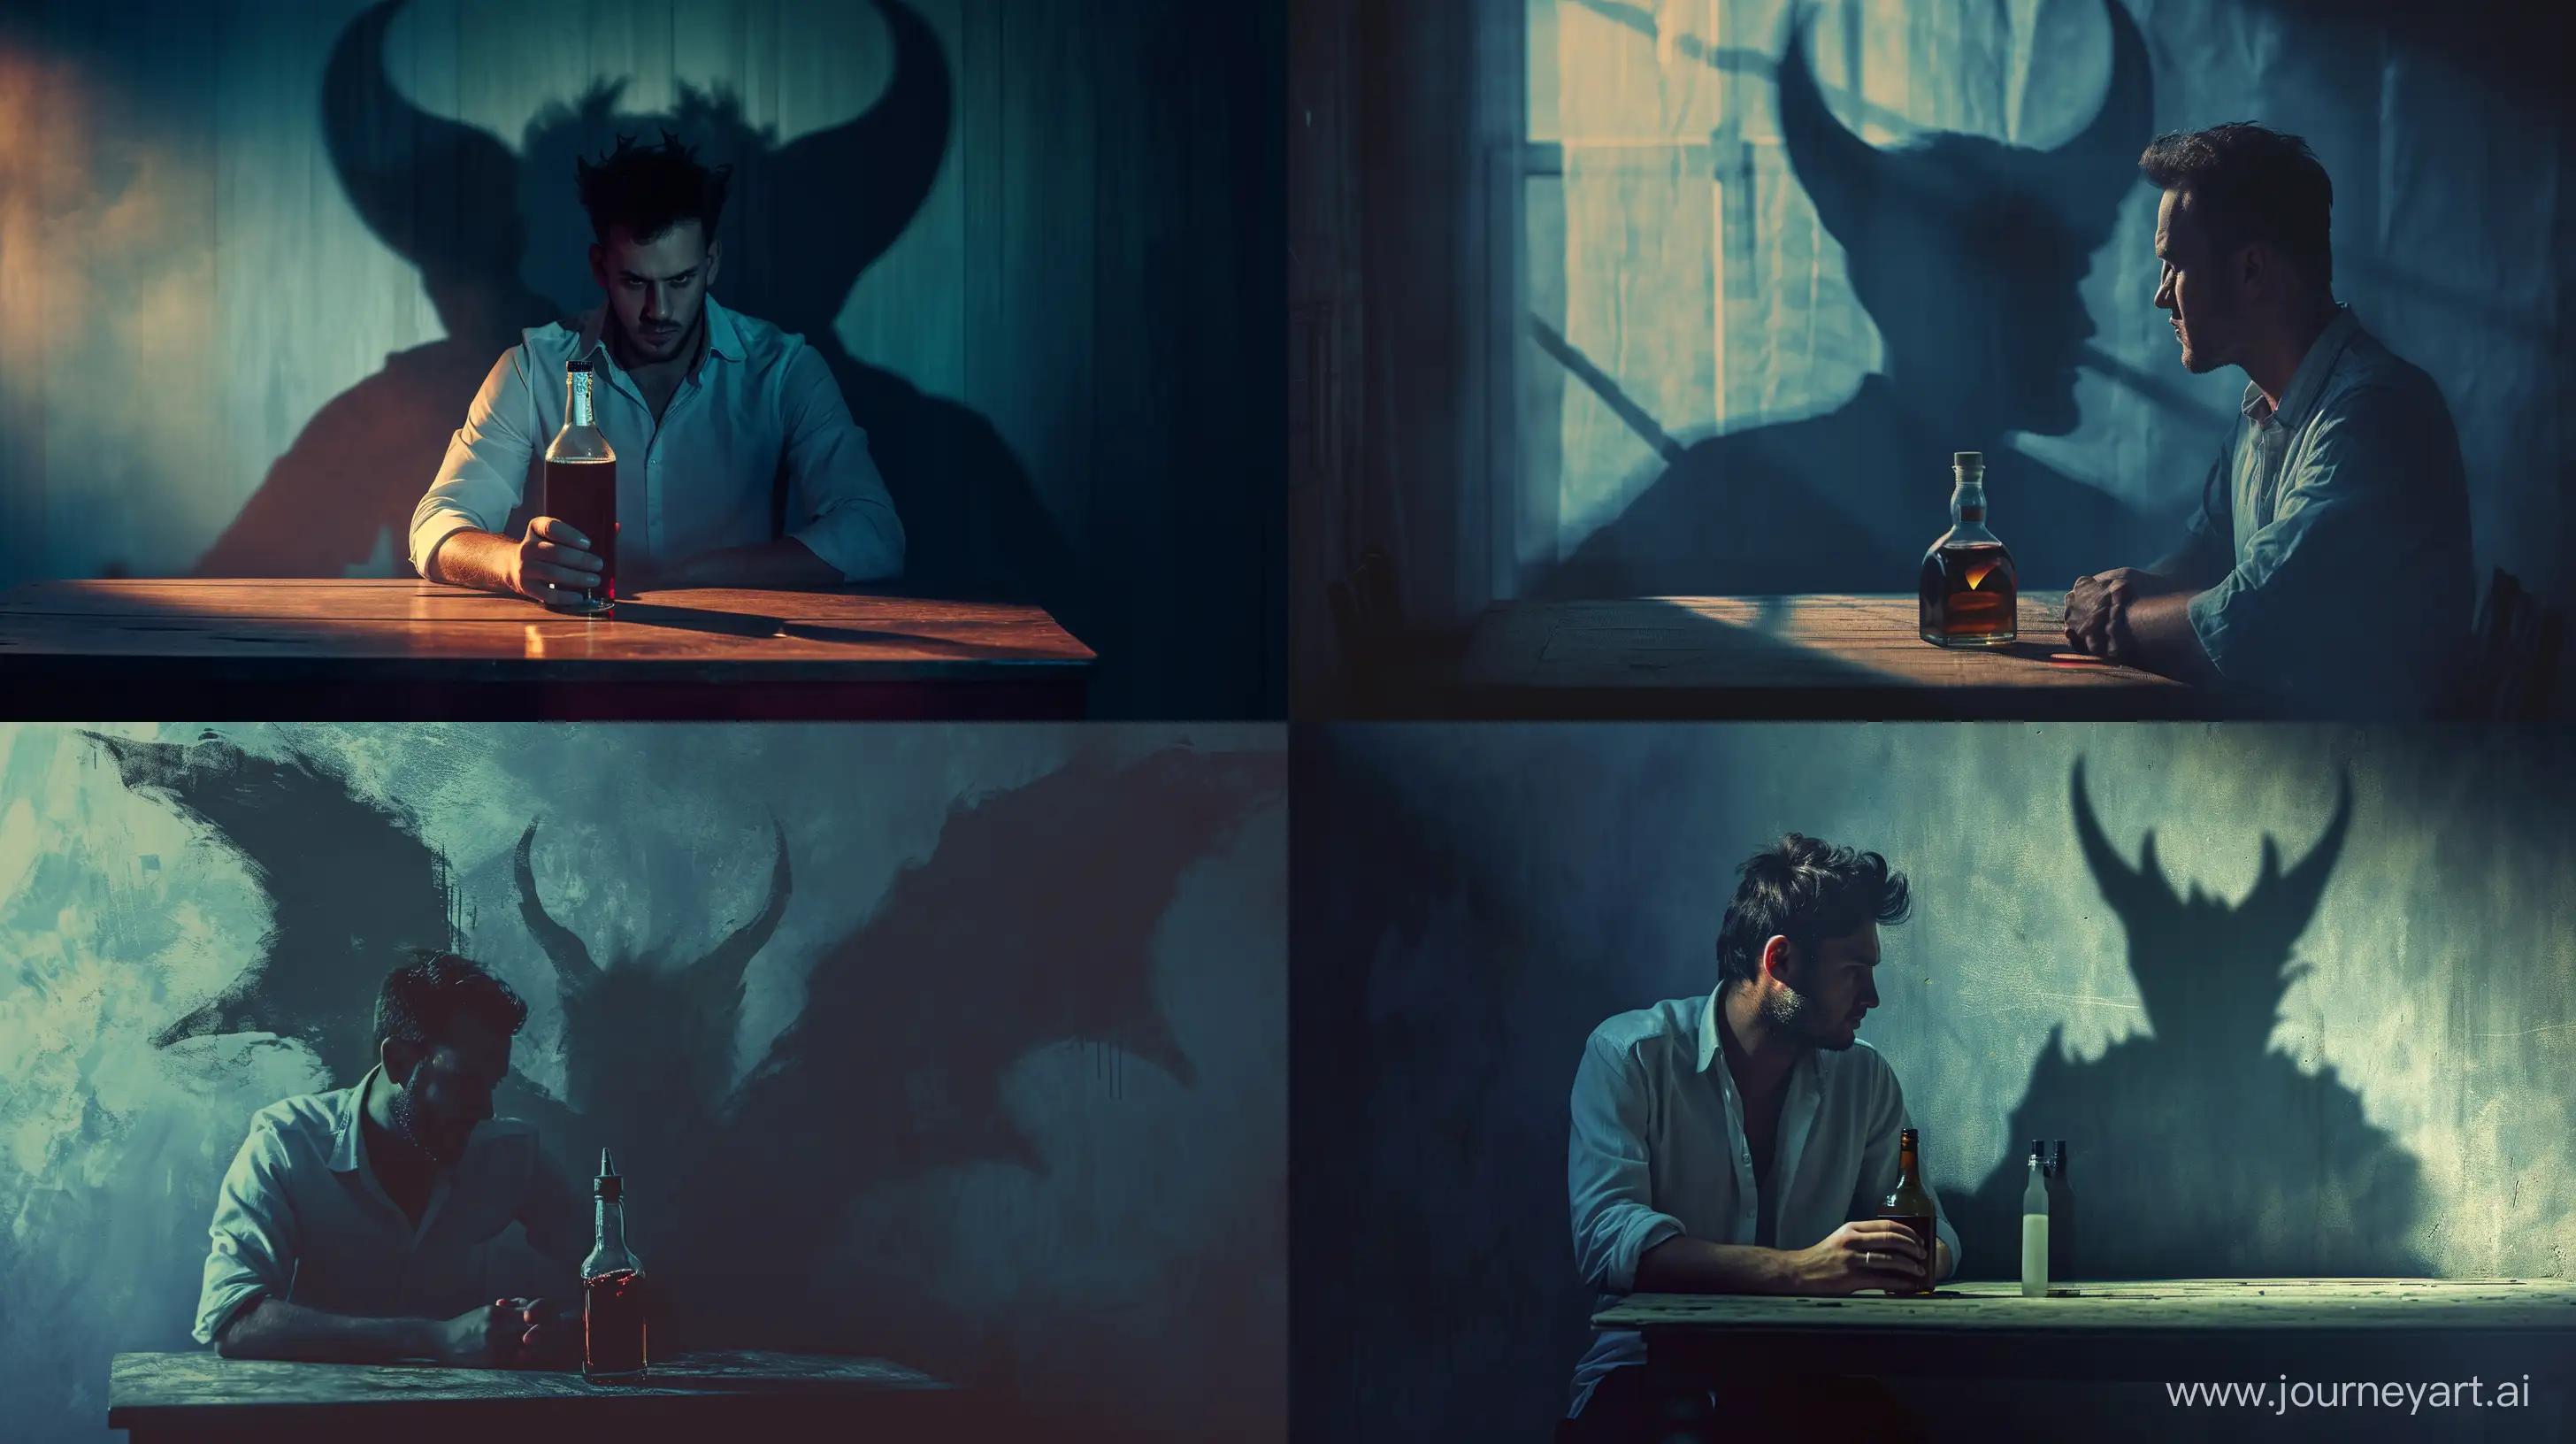 Create an atmospheric, dark, and symbolic cover for a Spotify song, focusing on the metaphor 'devil on the shoulder.' The scene features a man sitting at a table with an alcohol bottle, whose shadow forms the shape of devil's horns, symbolizing temptation and struggle with alcohol. The mood should be introspective and troubled, capturing the essence of the song's message. The man should appear contemplative, embodying the song's theme. --v 6.0 --ar 16:9